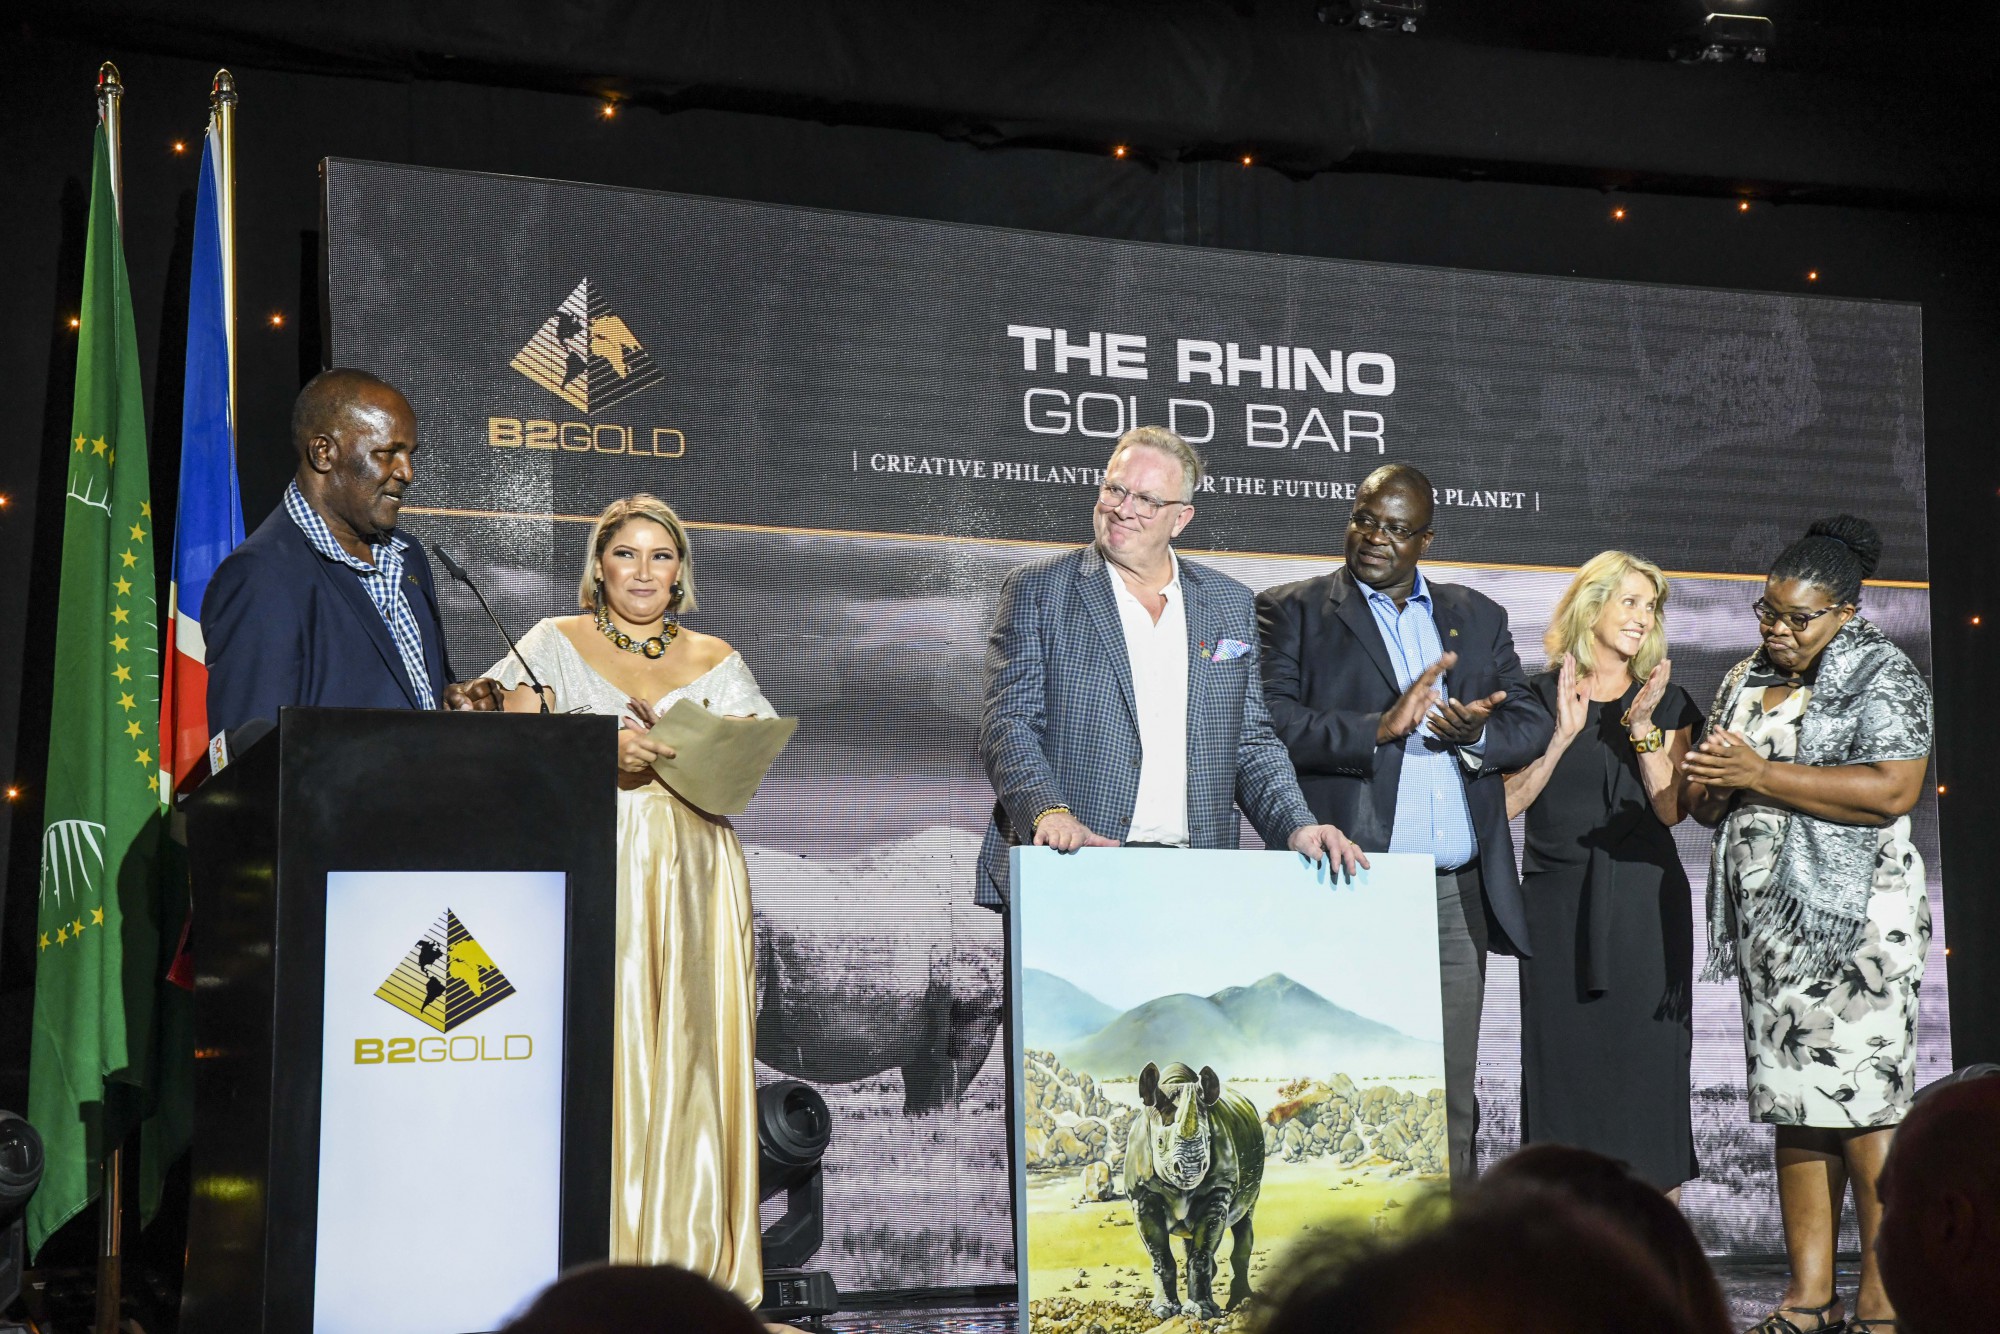 Members from Save the Rhino Trust &ldquo;SRT&rdquo; and Integrated Rural Development and Nature Conservation &ldquo;IRDNC&rdquo; presenting a token of their appreciation to Clive Johnson (President, CEO &amp; Director, B2Gold Corp.).  From left to right: Simson Uri-Khob (CEO, SRT), Clive Johnson, John Kasaona (Executive Director, IRDNC), Ginger Mauney (Director, SRT) and Maxi Louis (Board of Trustees Chairperson, SRT)